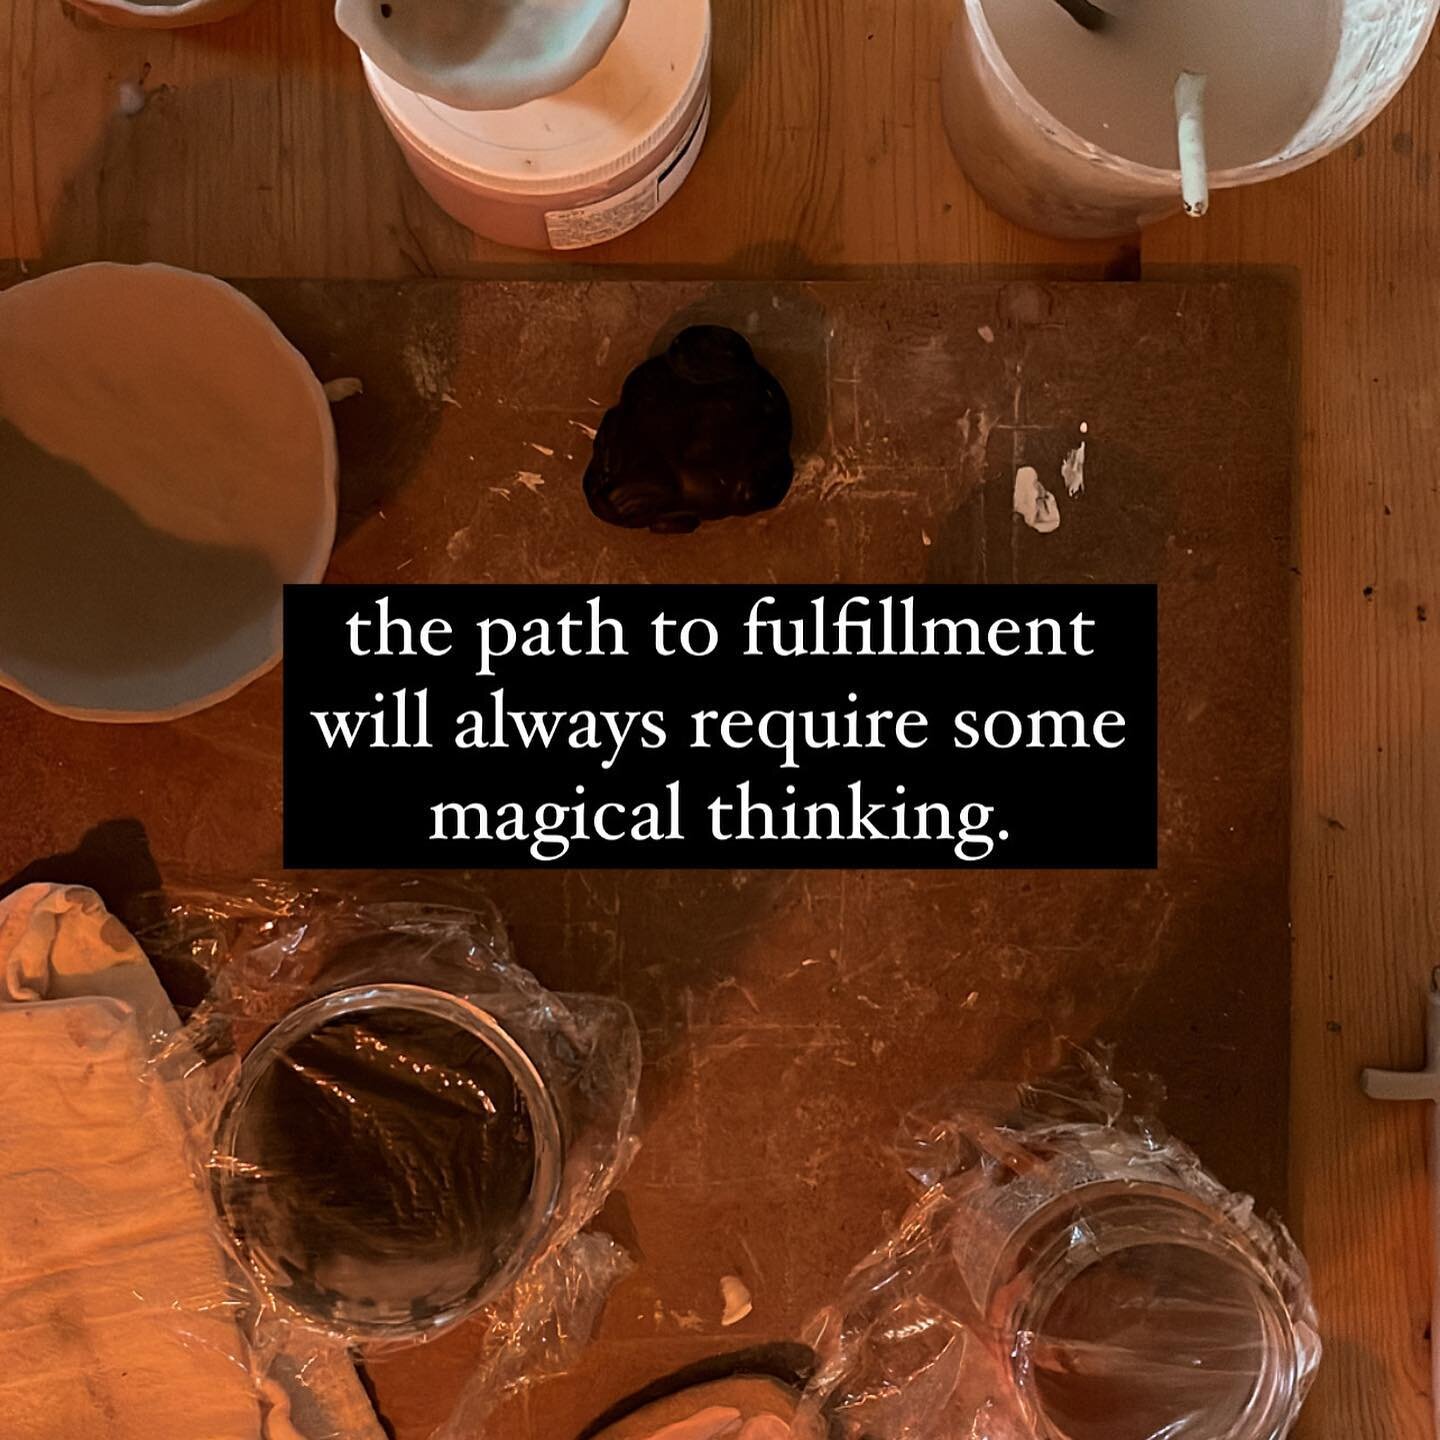 magical thinking is the most important ingredient to any form of &ldquo;success&rdquo;, material or otherwise. 

even baby making requires some sort of magical thinking. stop trying to bypass this requirement with logic, it just doesn&rsquo;t work.

